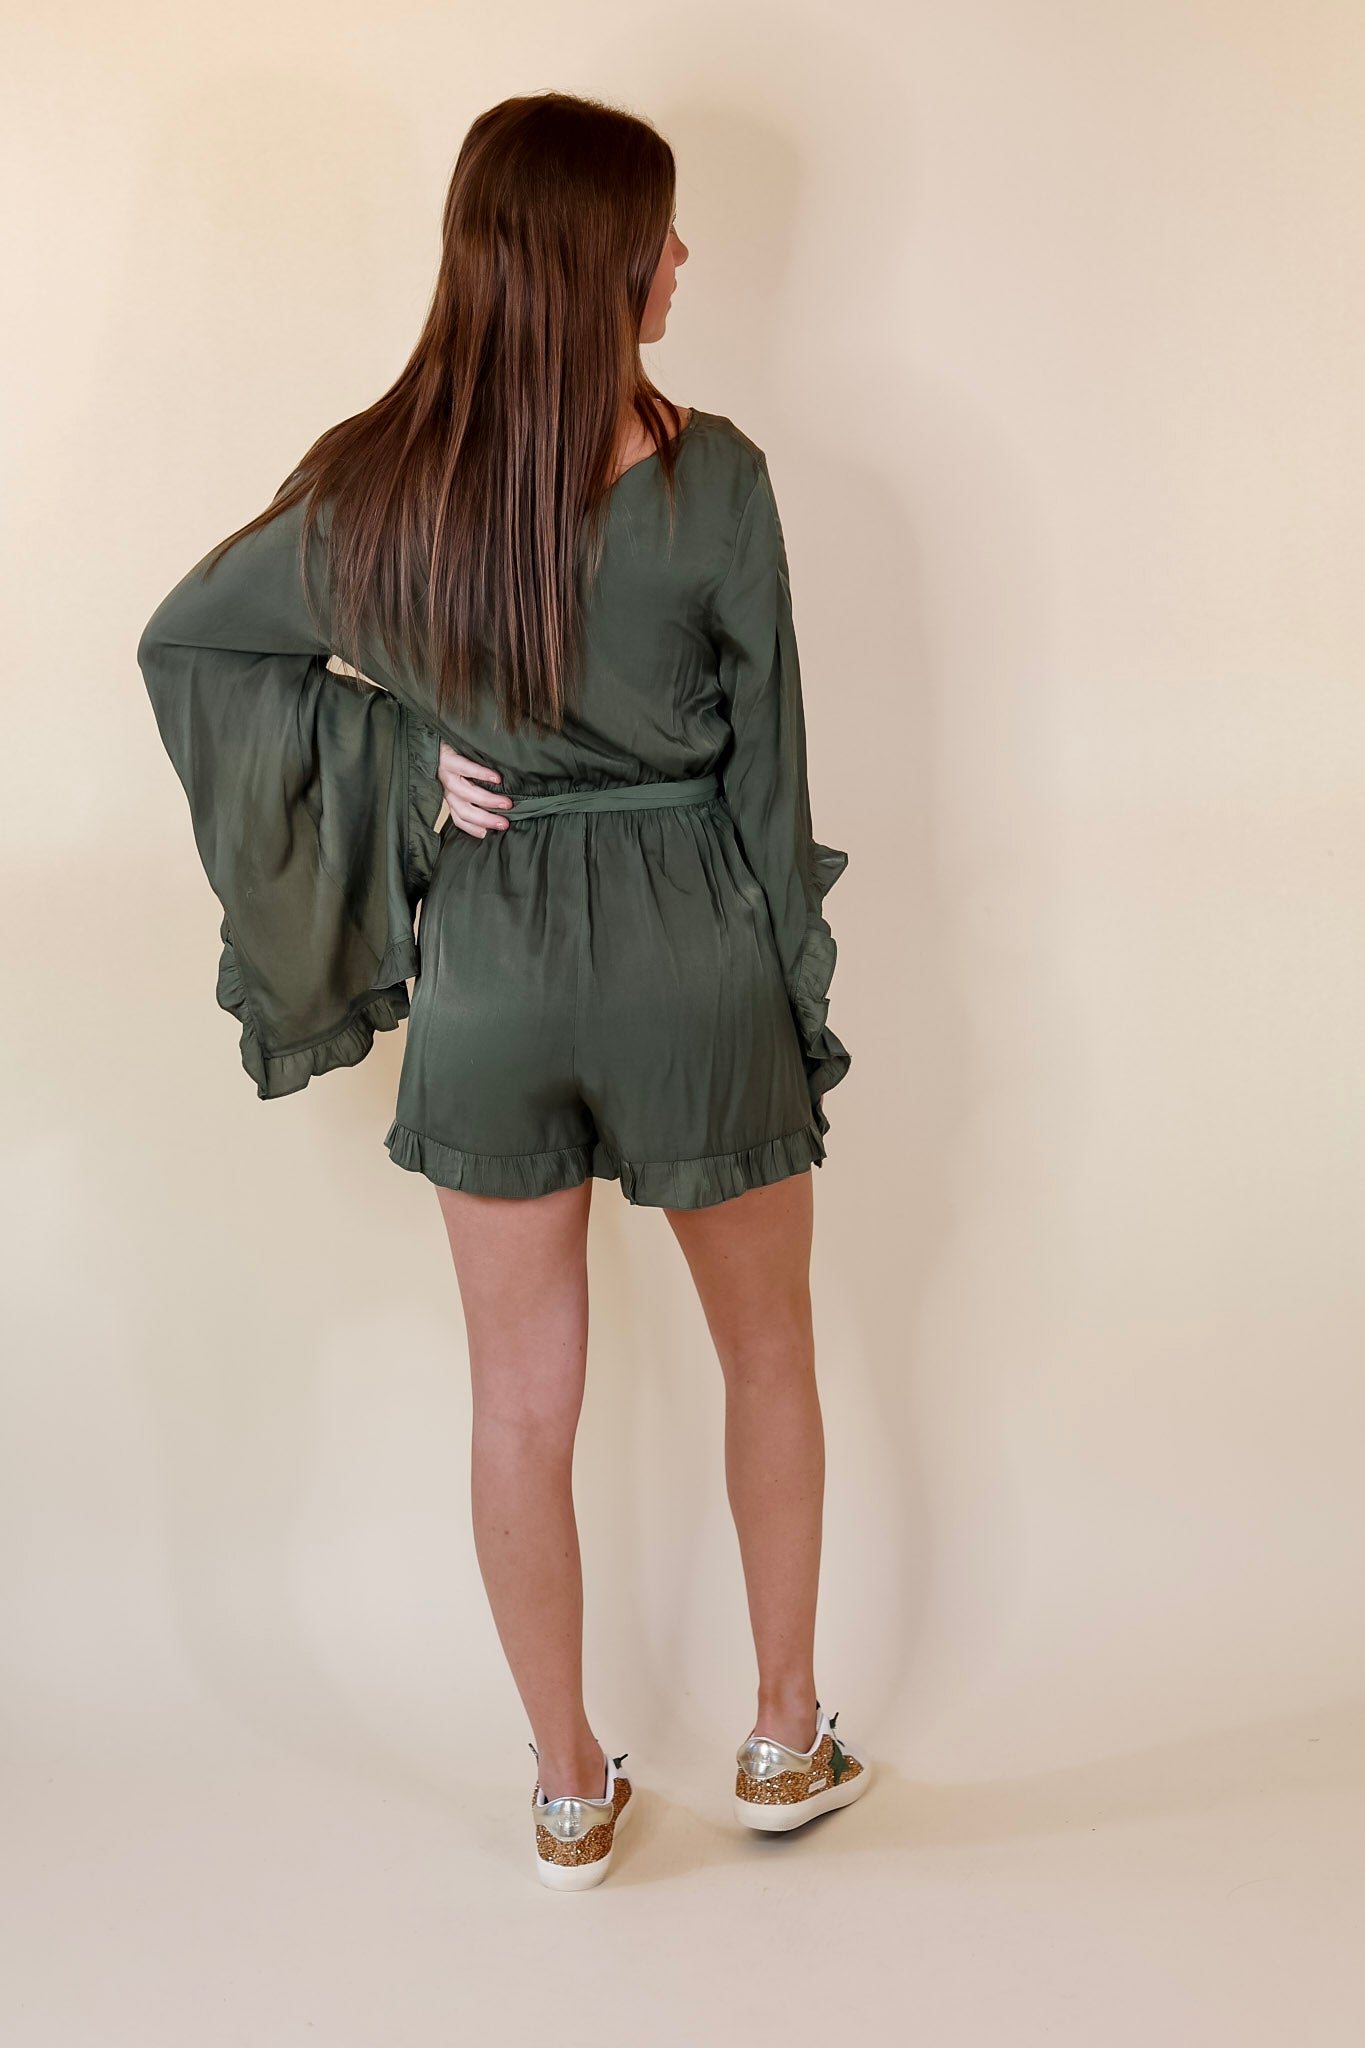 Something More Ruffle Trim Long Sleeve Satin Romper in Olive Green - Giddy Up Glamour Boutique